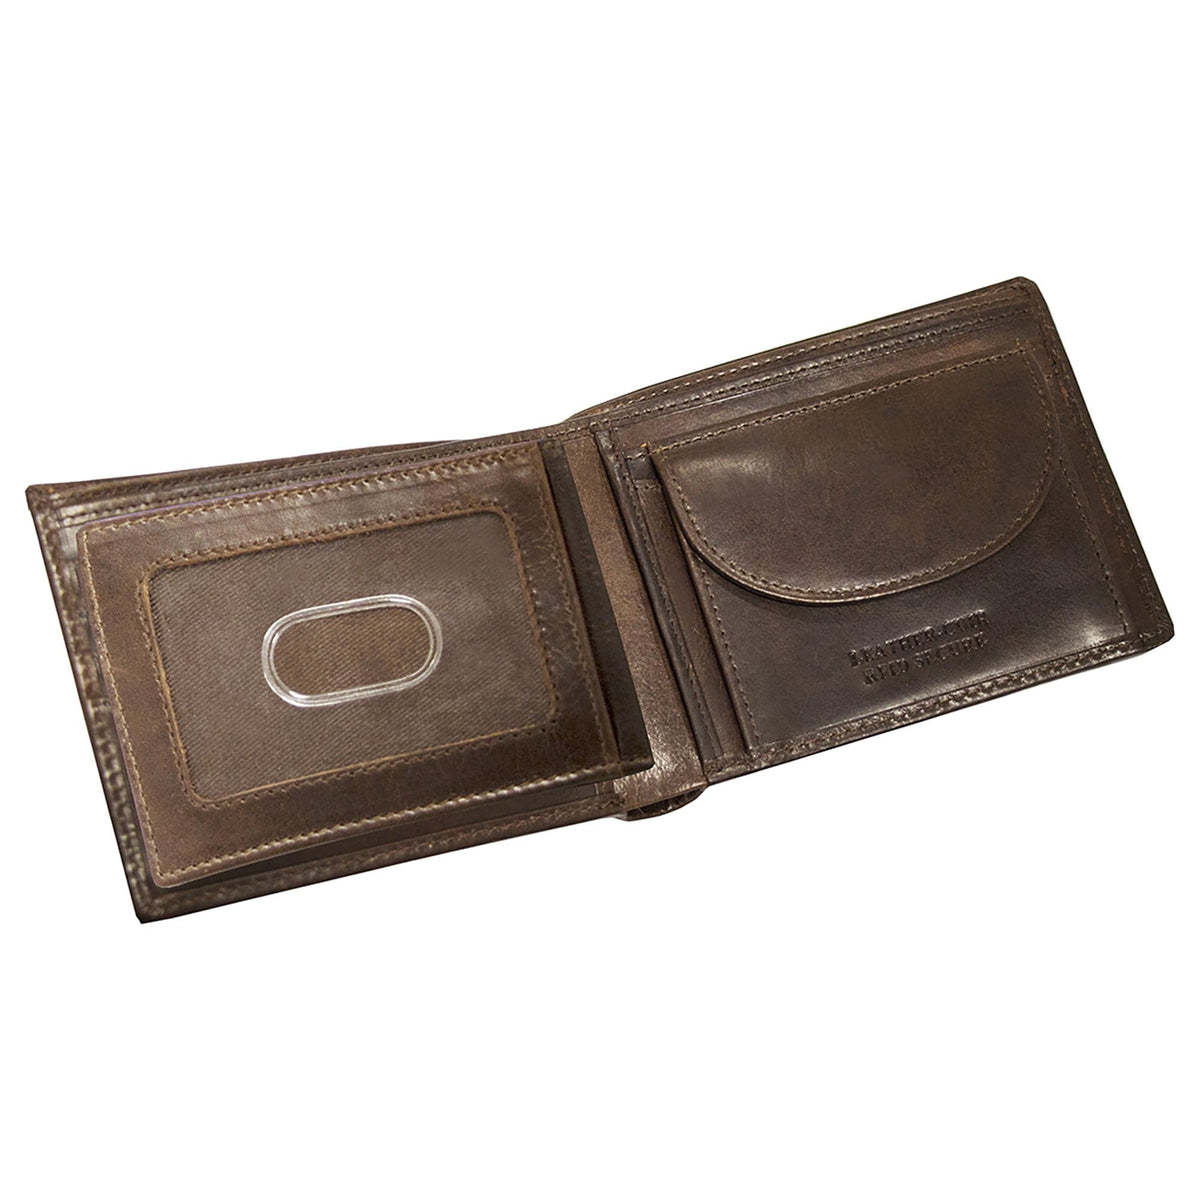 Mancini Boulder Men's RFID Secure Wallet with Removable Passcase and Coin Pocket